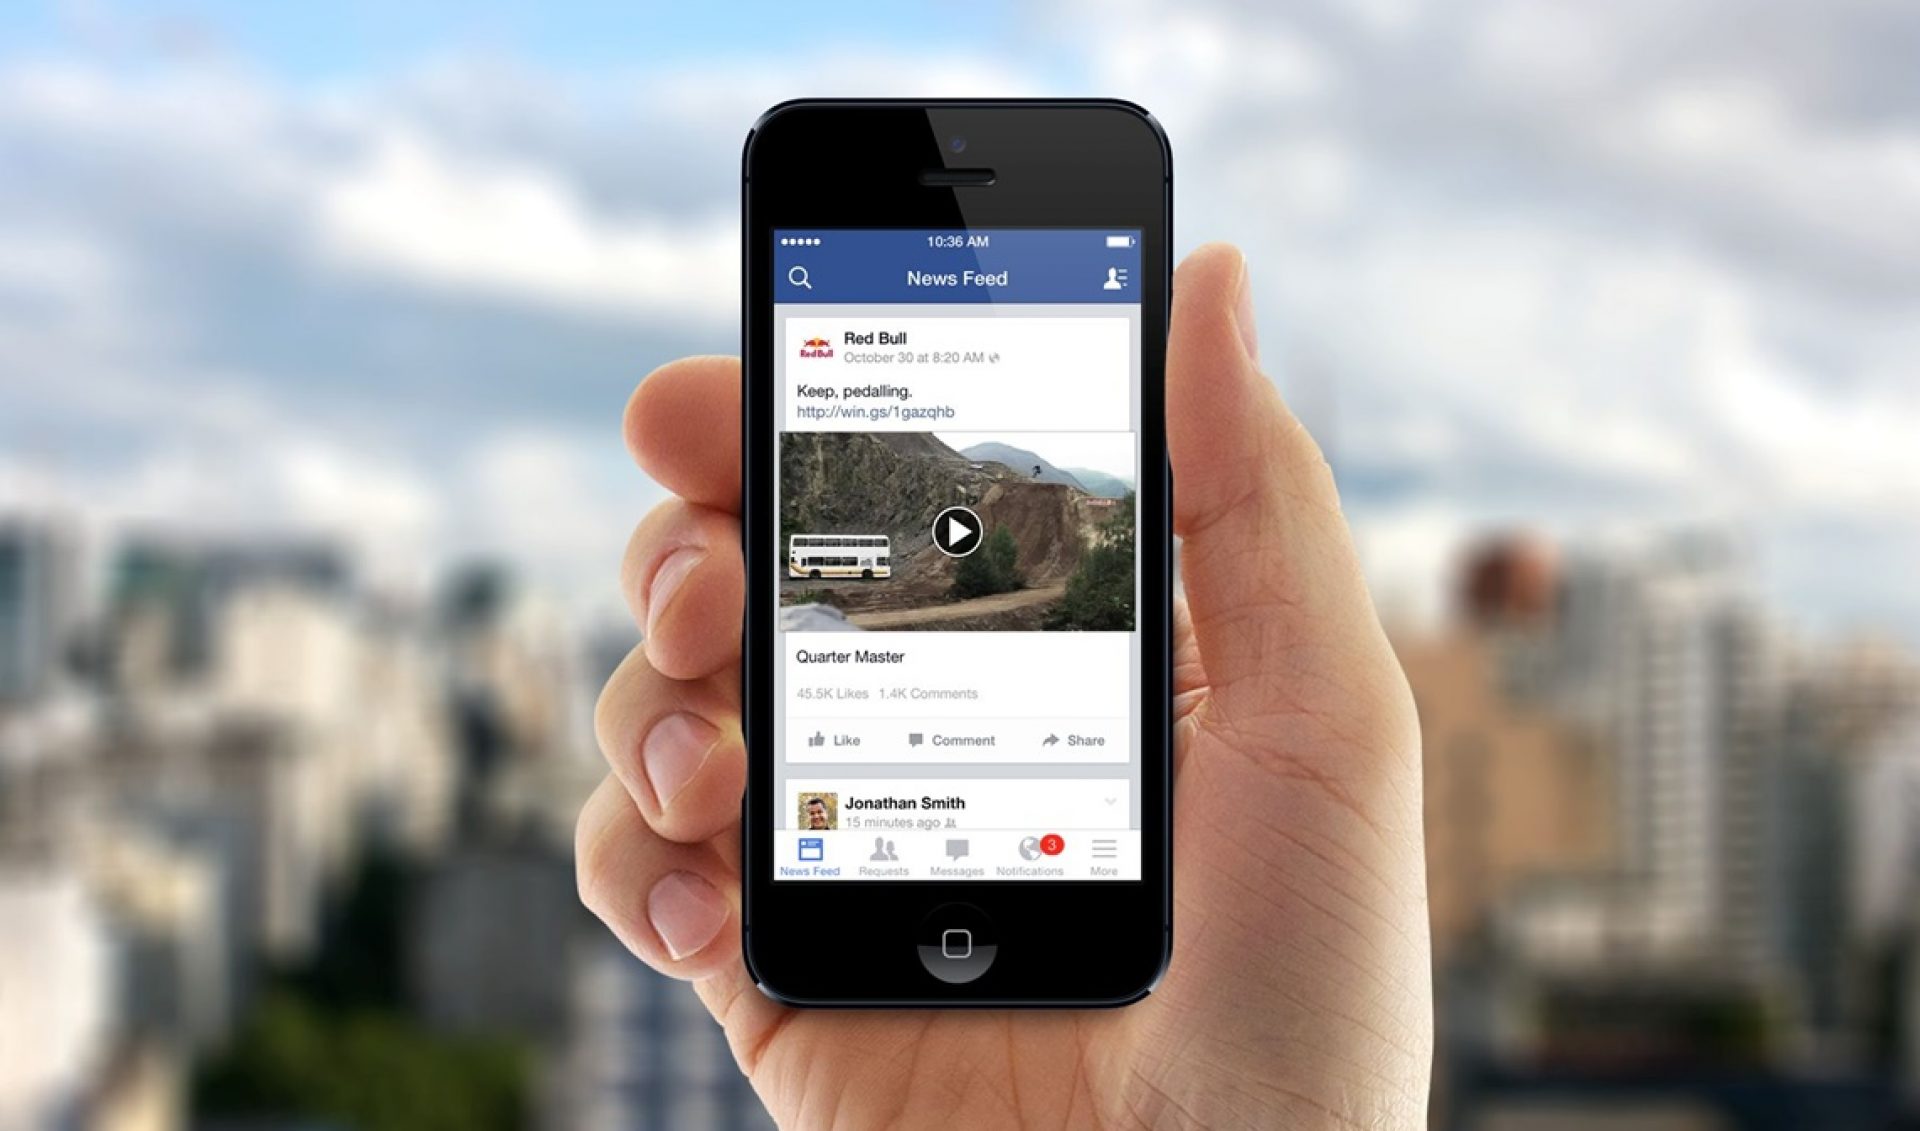 Facebook Videos Will Now Autoplay With Sound, Company Confirms Smart TV App Coming Soon